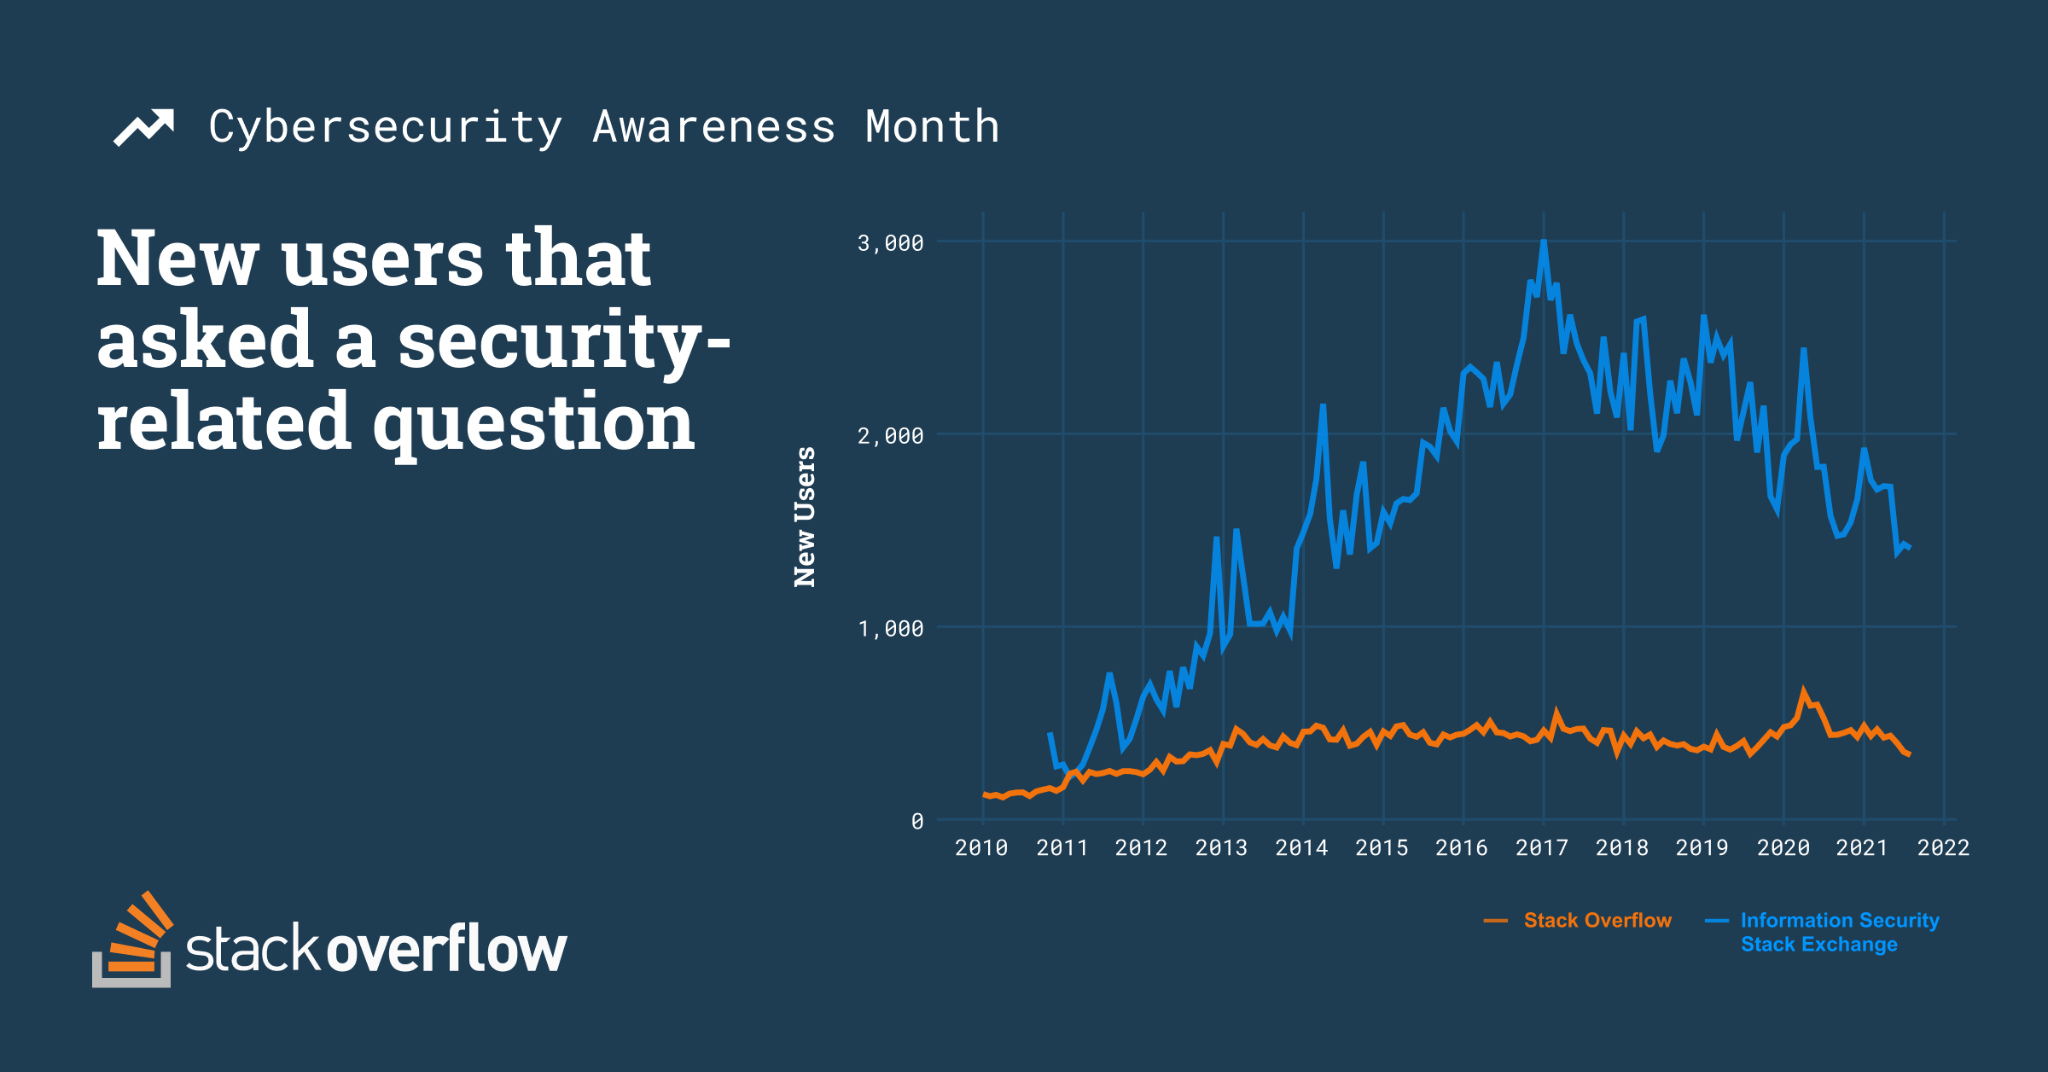 Time series chart company new users to Stack Overflow that asked a security question and new users on Information Security Stack Exchange site. Stack Overflow peaked in early 2020 during the pandemic reaching, and Information Security Stack Exchange questions peaked in late 2016 after significant data breaches reaching 3,000 users.